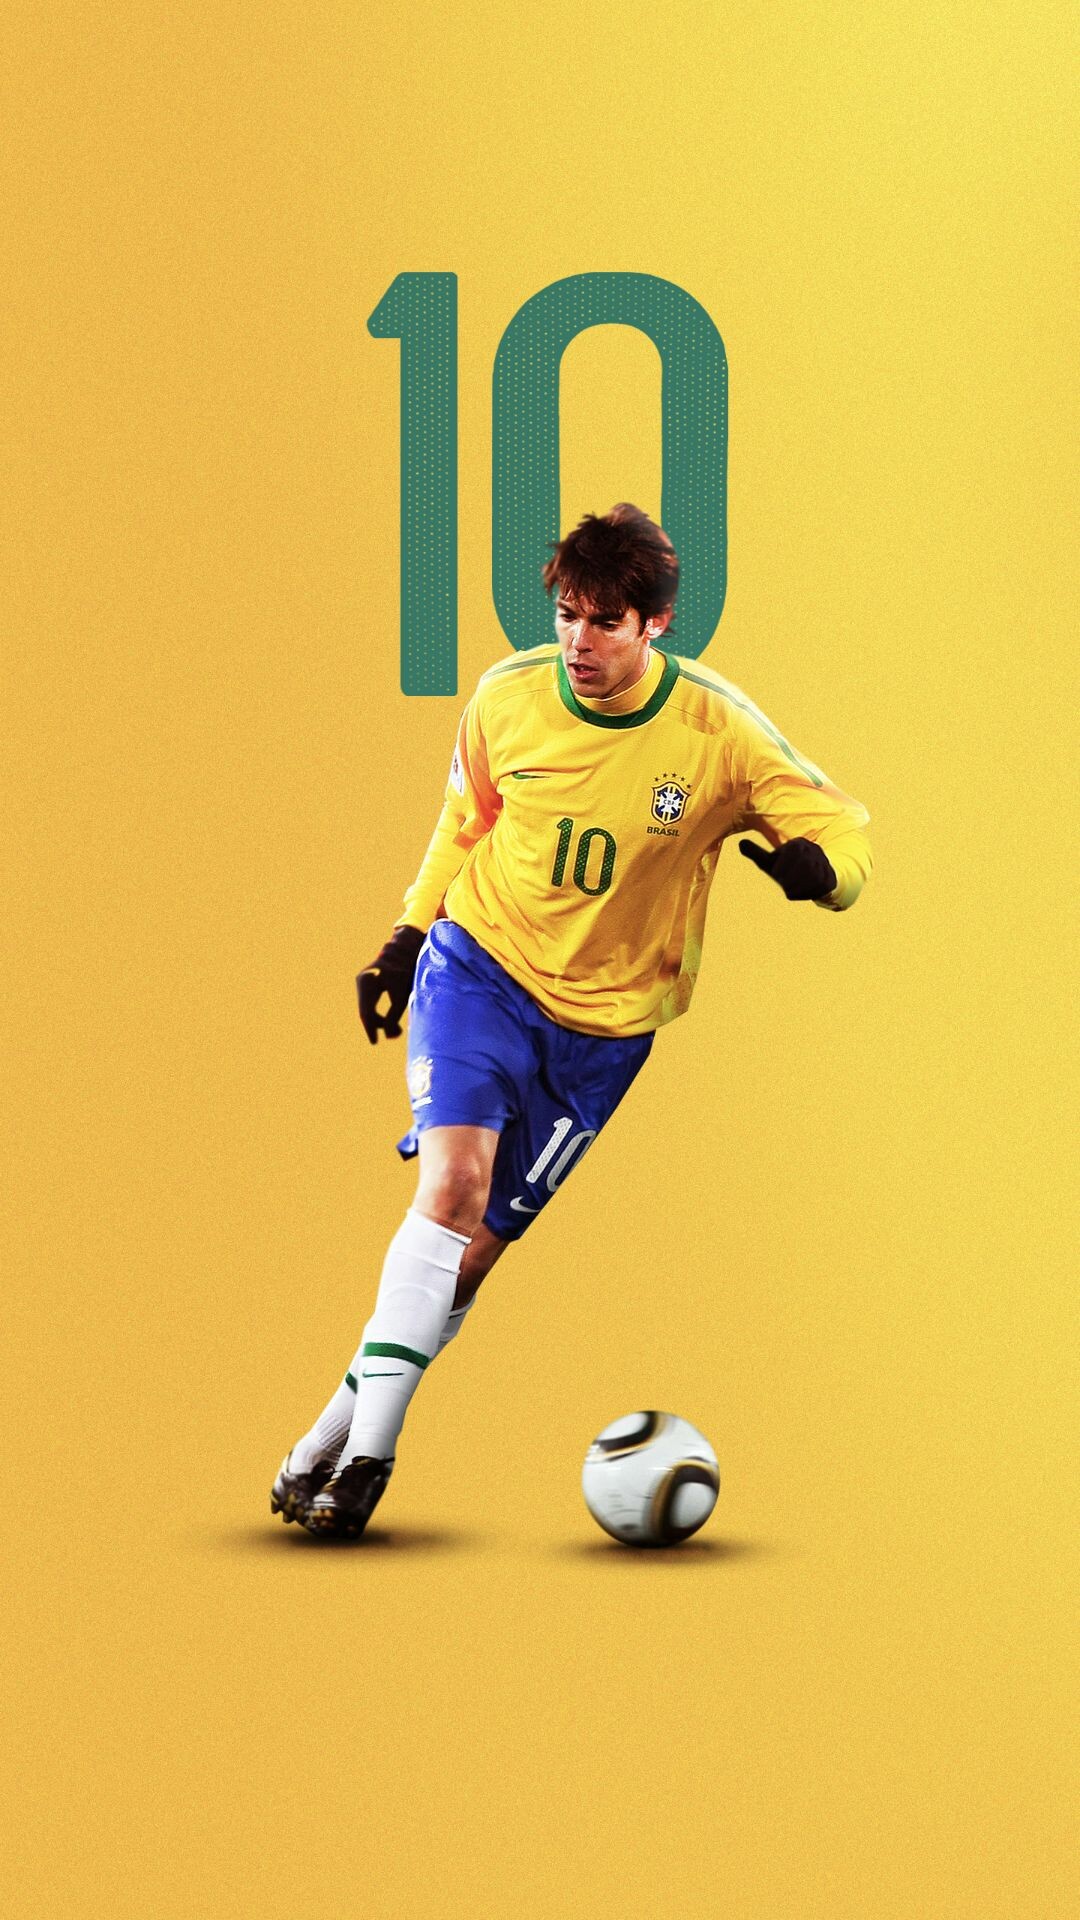 Kaká: Sports, Made his debut for the Brazil national football team in 2002. 1080x1920 Full HD Background.